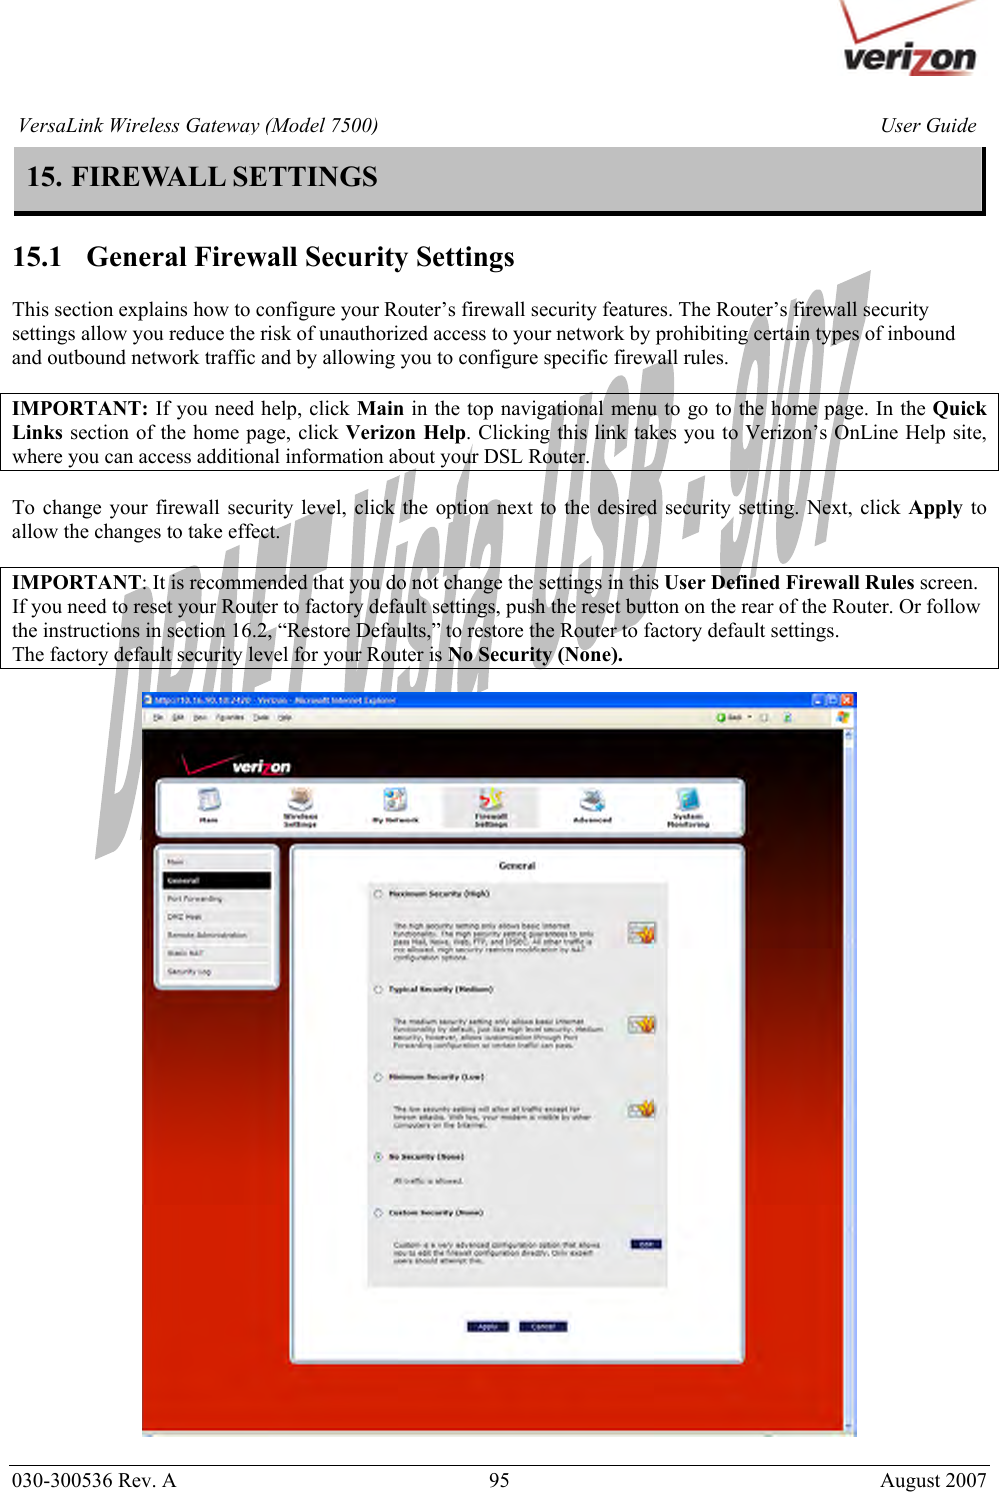       030-300536 Rev. A  95       August 2007 User GuideVersaLink Wireless Gateway (Model 7500)15. FIREWALL SETTINGS  15.1   General Firewall Security Settings  This section explains how to configure your Router’s firewall security features. The Router’s firewall security settings allow you reduce the risk of unauthorized access to your network by prohibiting certain types of inbound and outbound network traffic and by allowing you to configure specific firewall rules.  IMPORTANT: If you need help, click Main in the top navigational menu to go to the home page. In the Quick Links section of the home page, click Verizon Help. Clicking this link takes you to Verizon’s OnLine Help site, where you can access additional information about your DSL Router.   To change your firewall security level, click the option next to the desired security setting. Next, click Apply to allow the changes to take effect.   IMPORTANT: It is recommended that you do not change the settings in this User Defined Firewall Rules screen. If you need to reset your Router to factory default settings, push the reset button on the rear of the Router. Or follow the instructions in section 16.2, “Restore Defaults,” to restore the Router to factory default settings. The factory default security level for your Router is No Security (None).    